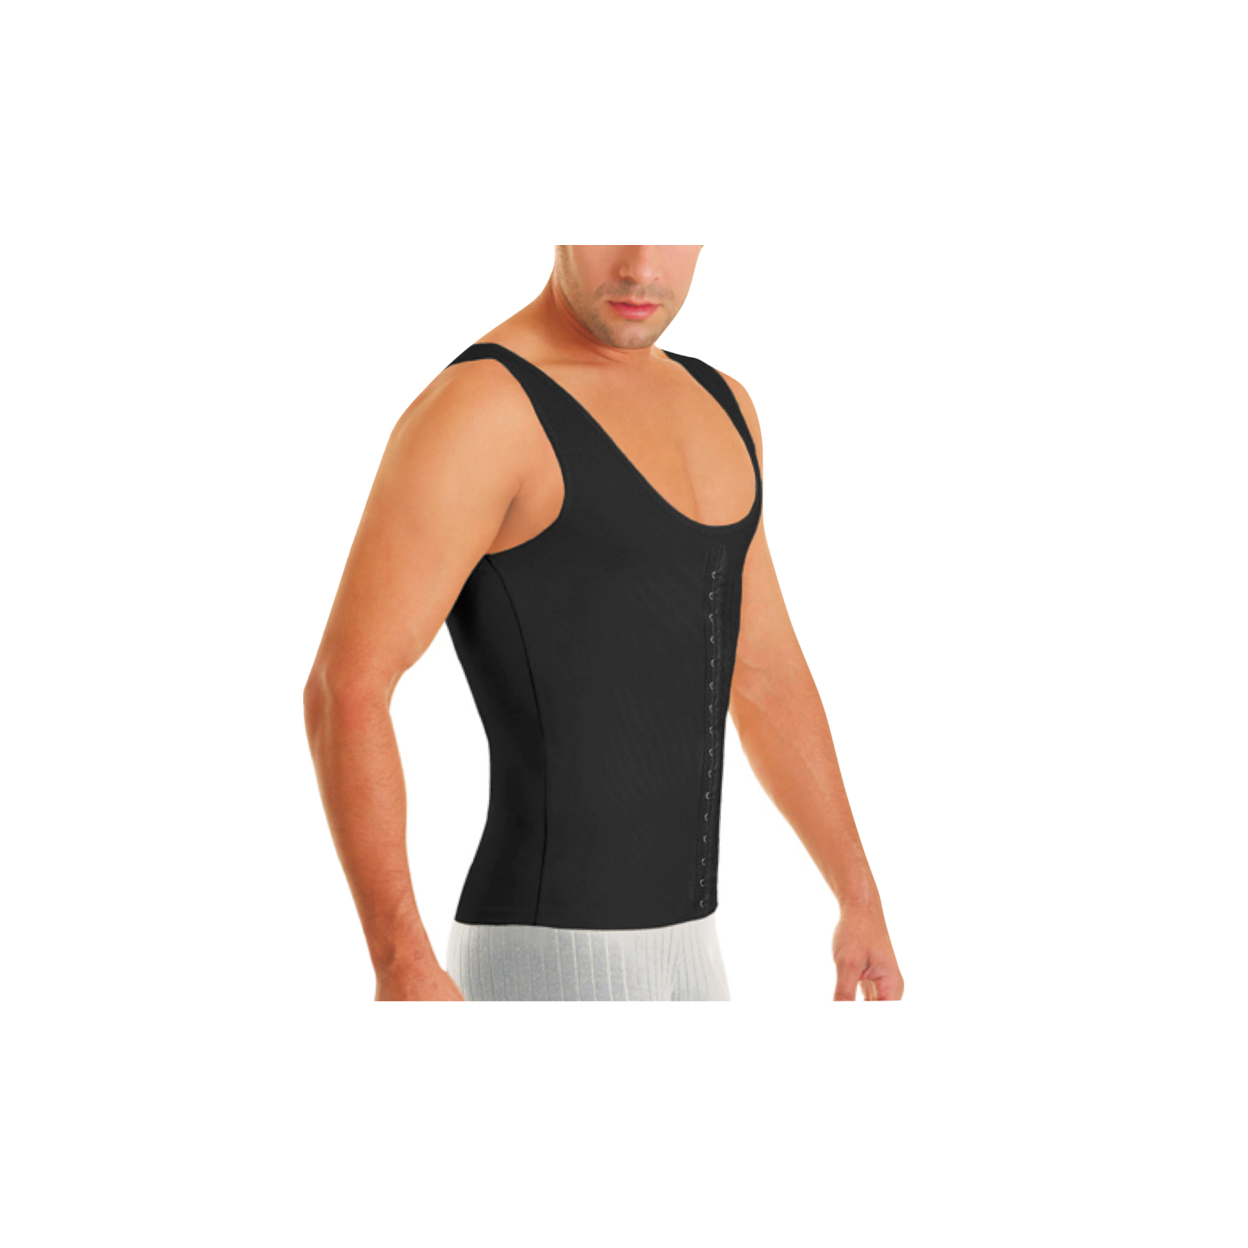 Men Waistcoat High-Compression Body Shaper In Regular And Plus Sizes - Black, Small